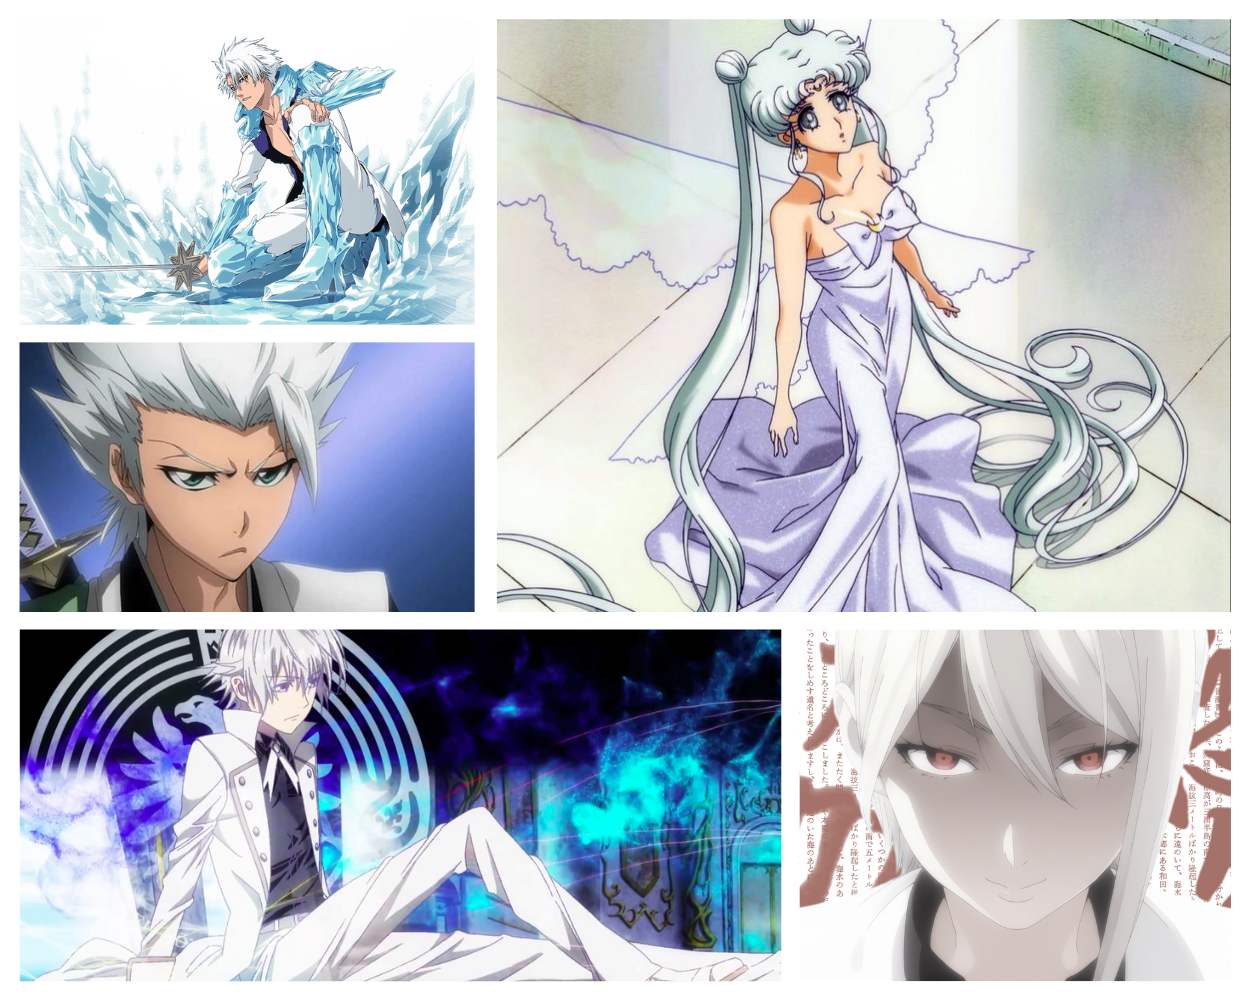 Top 10 Super Dreamboat Anime Characters with White Hair - (Updated)